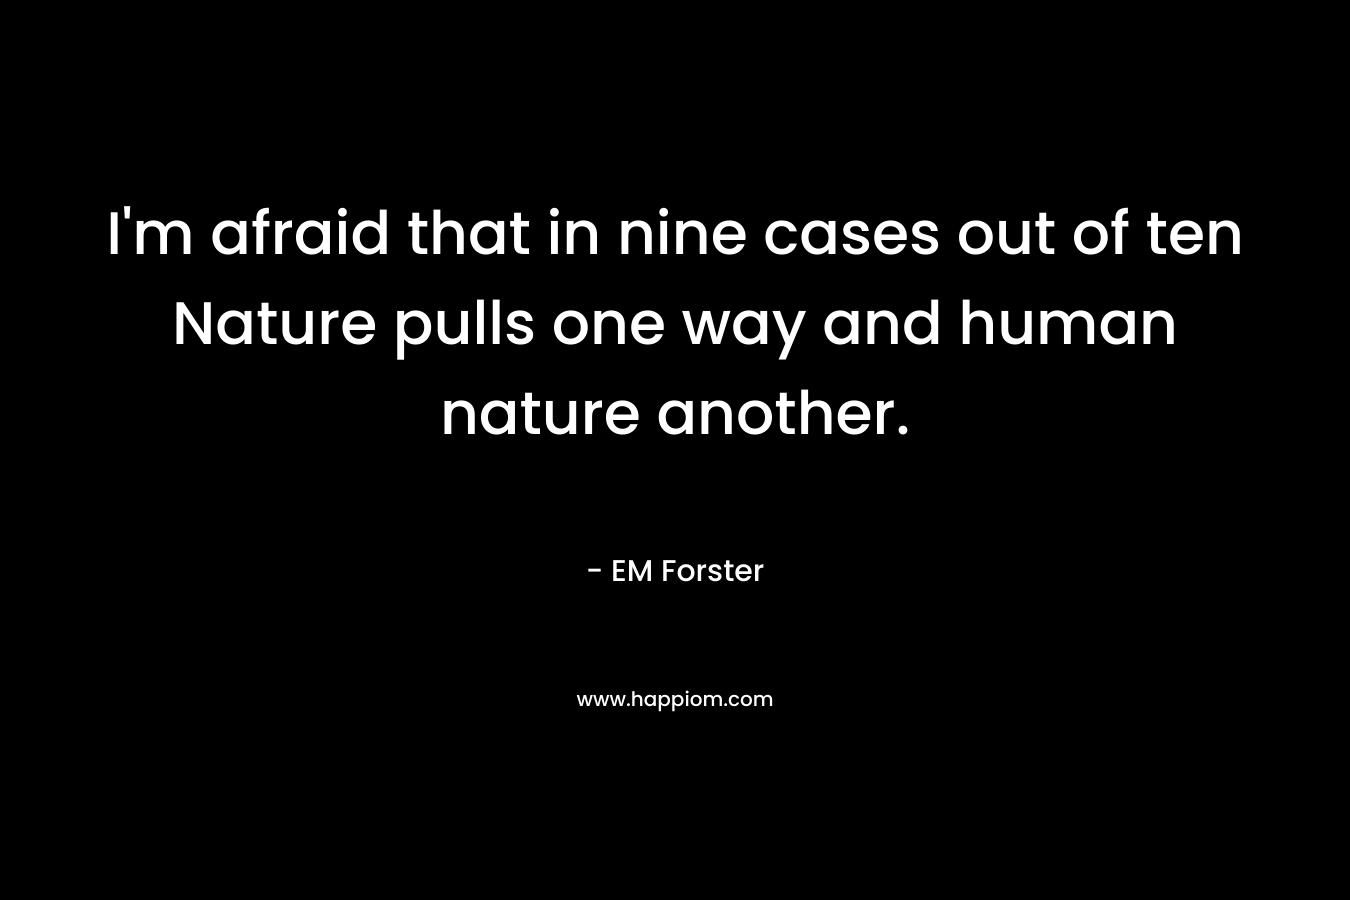 I’m afraid that in nine cases out of ten Nature pulls one way and human nature another. – EM Forster